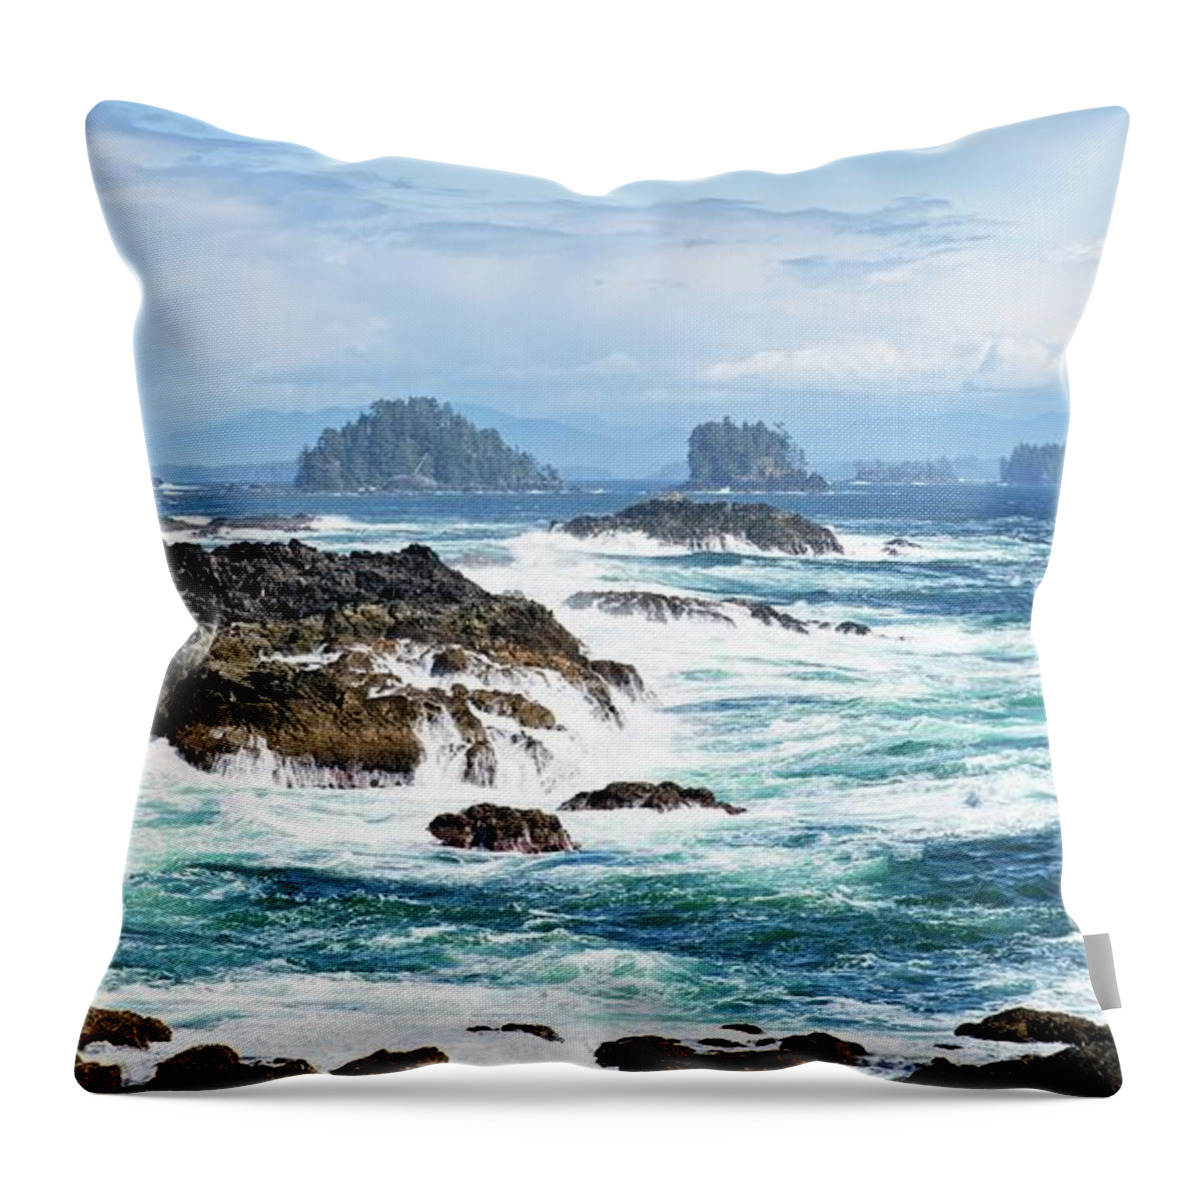 Tofino Throw Pillow featuring the photograph More Than This by Allan Van Gasbeck